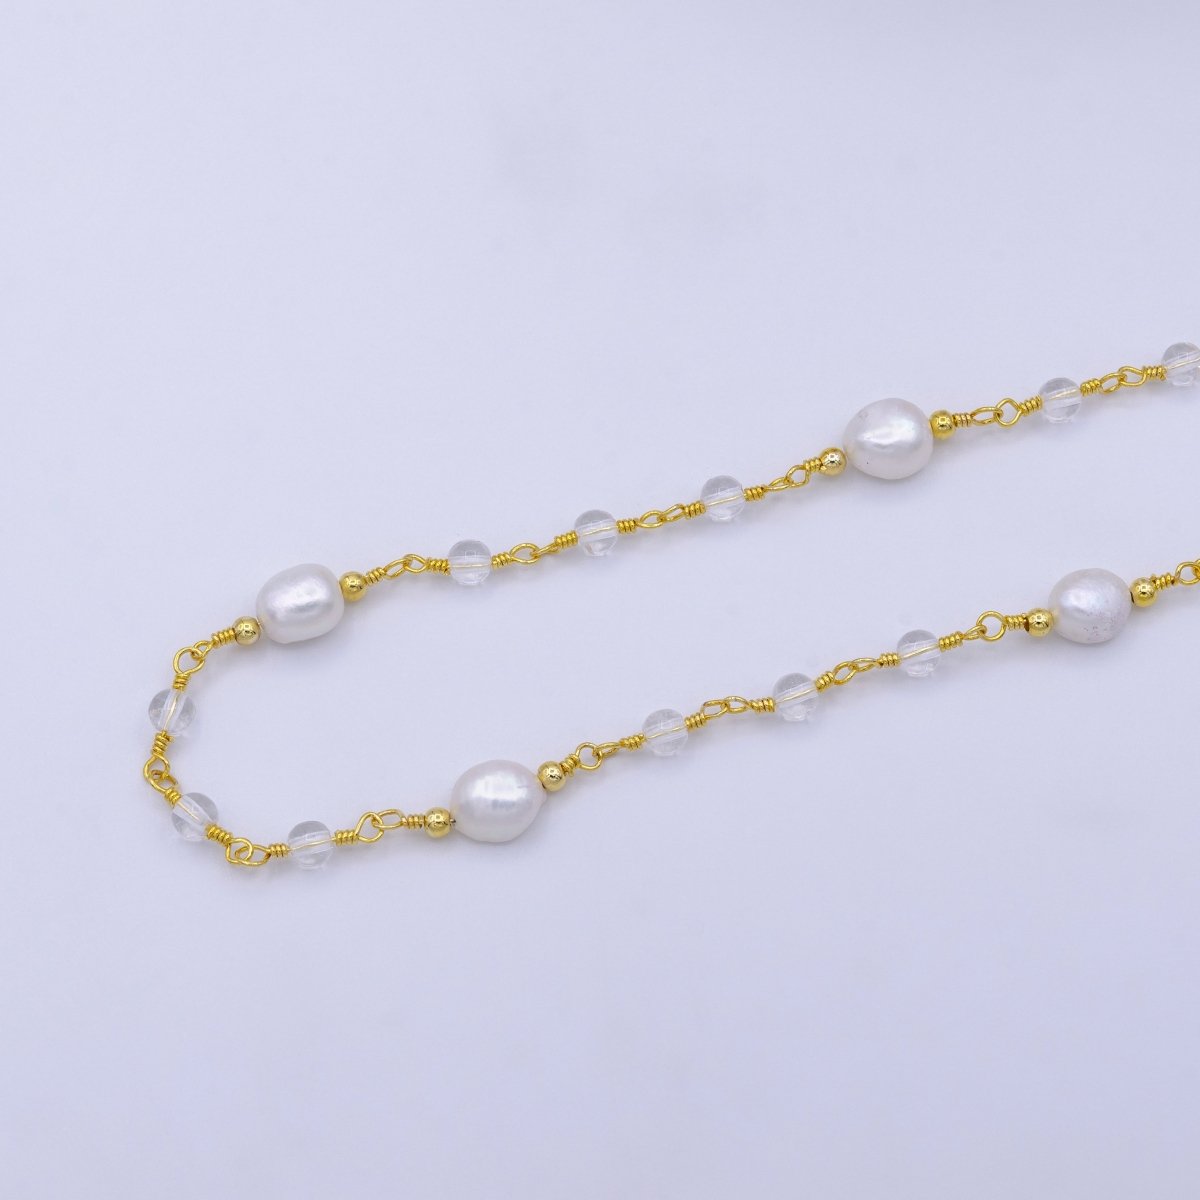 14K Gold Filled Pearl Chain, White Freshwater Pearl Rosary Chain, Bulk Chain Clear Quartz Beads Beaded Unfinished Chain by Yard | ROLL-1214 Clearance Pricing - DLUXCA